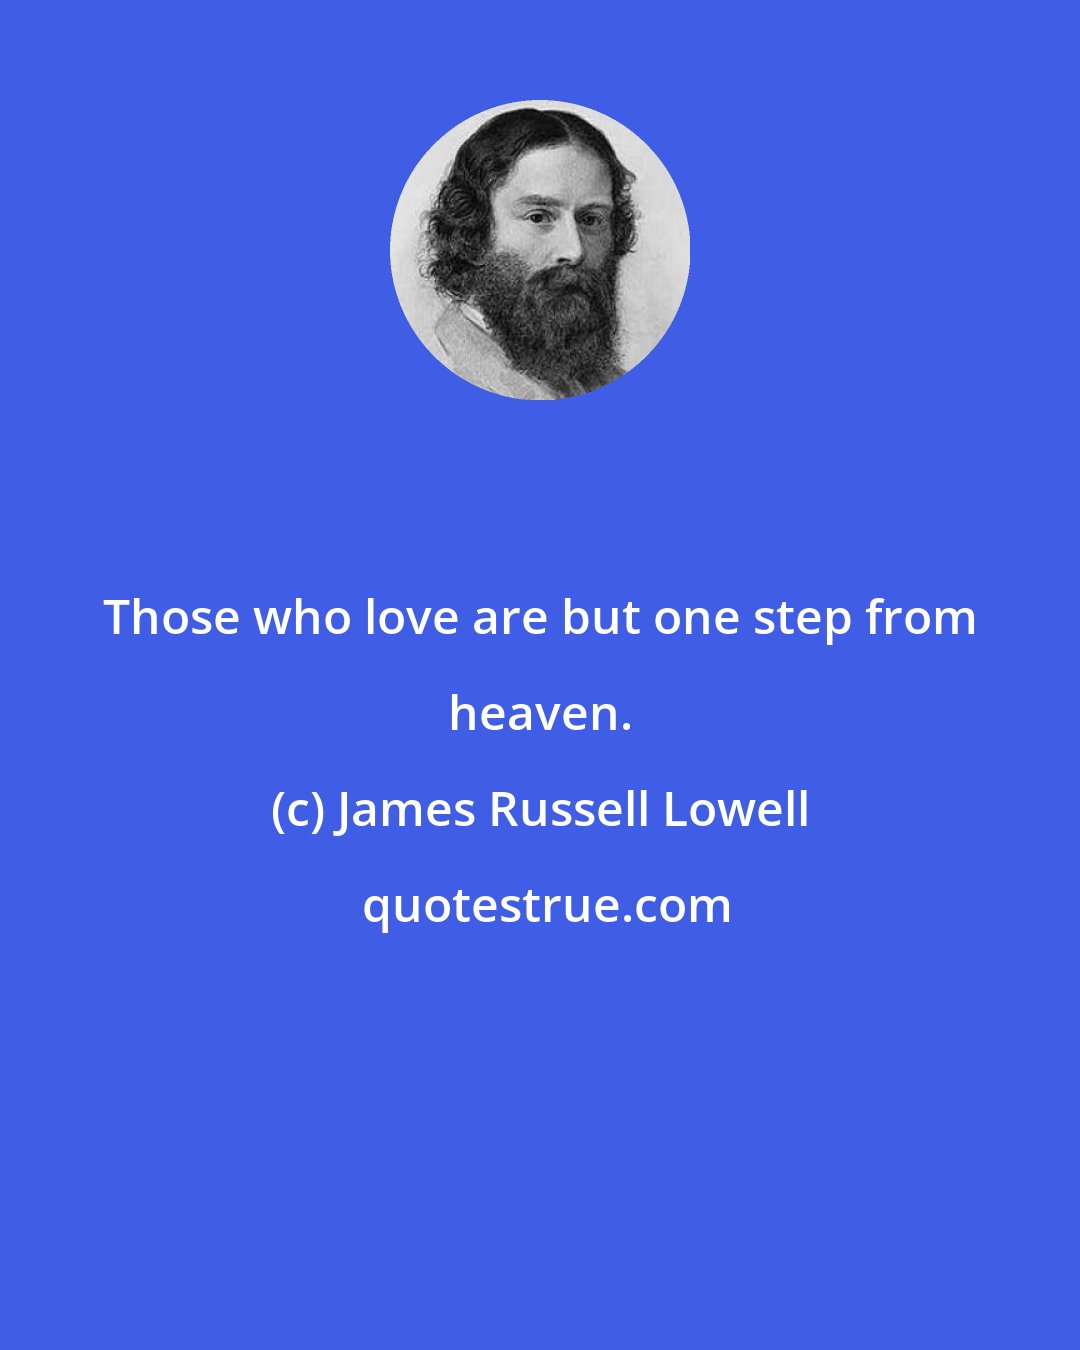 James Russell Lowell: Those who love are but one step from heaven.